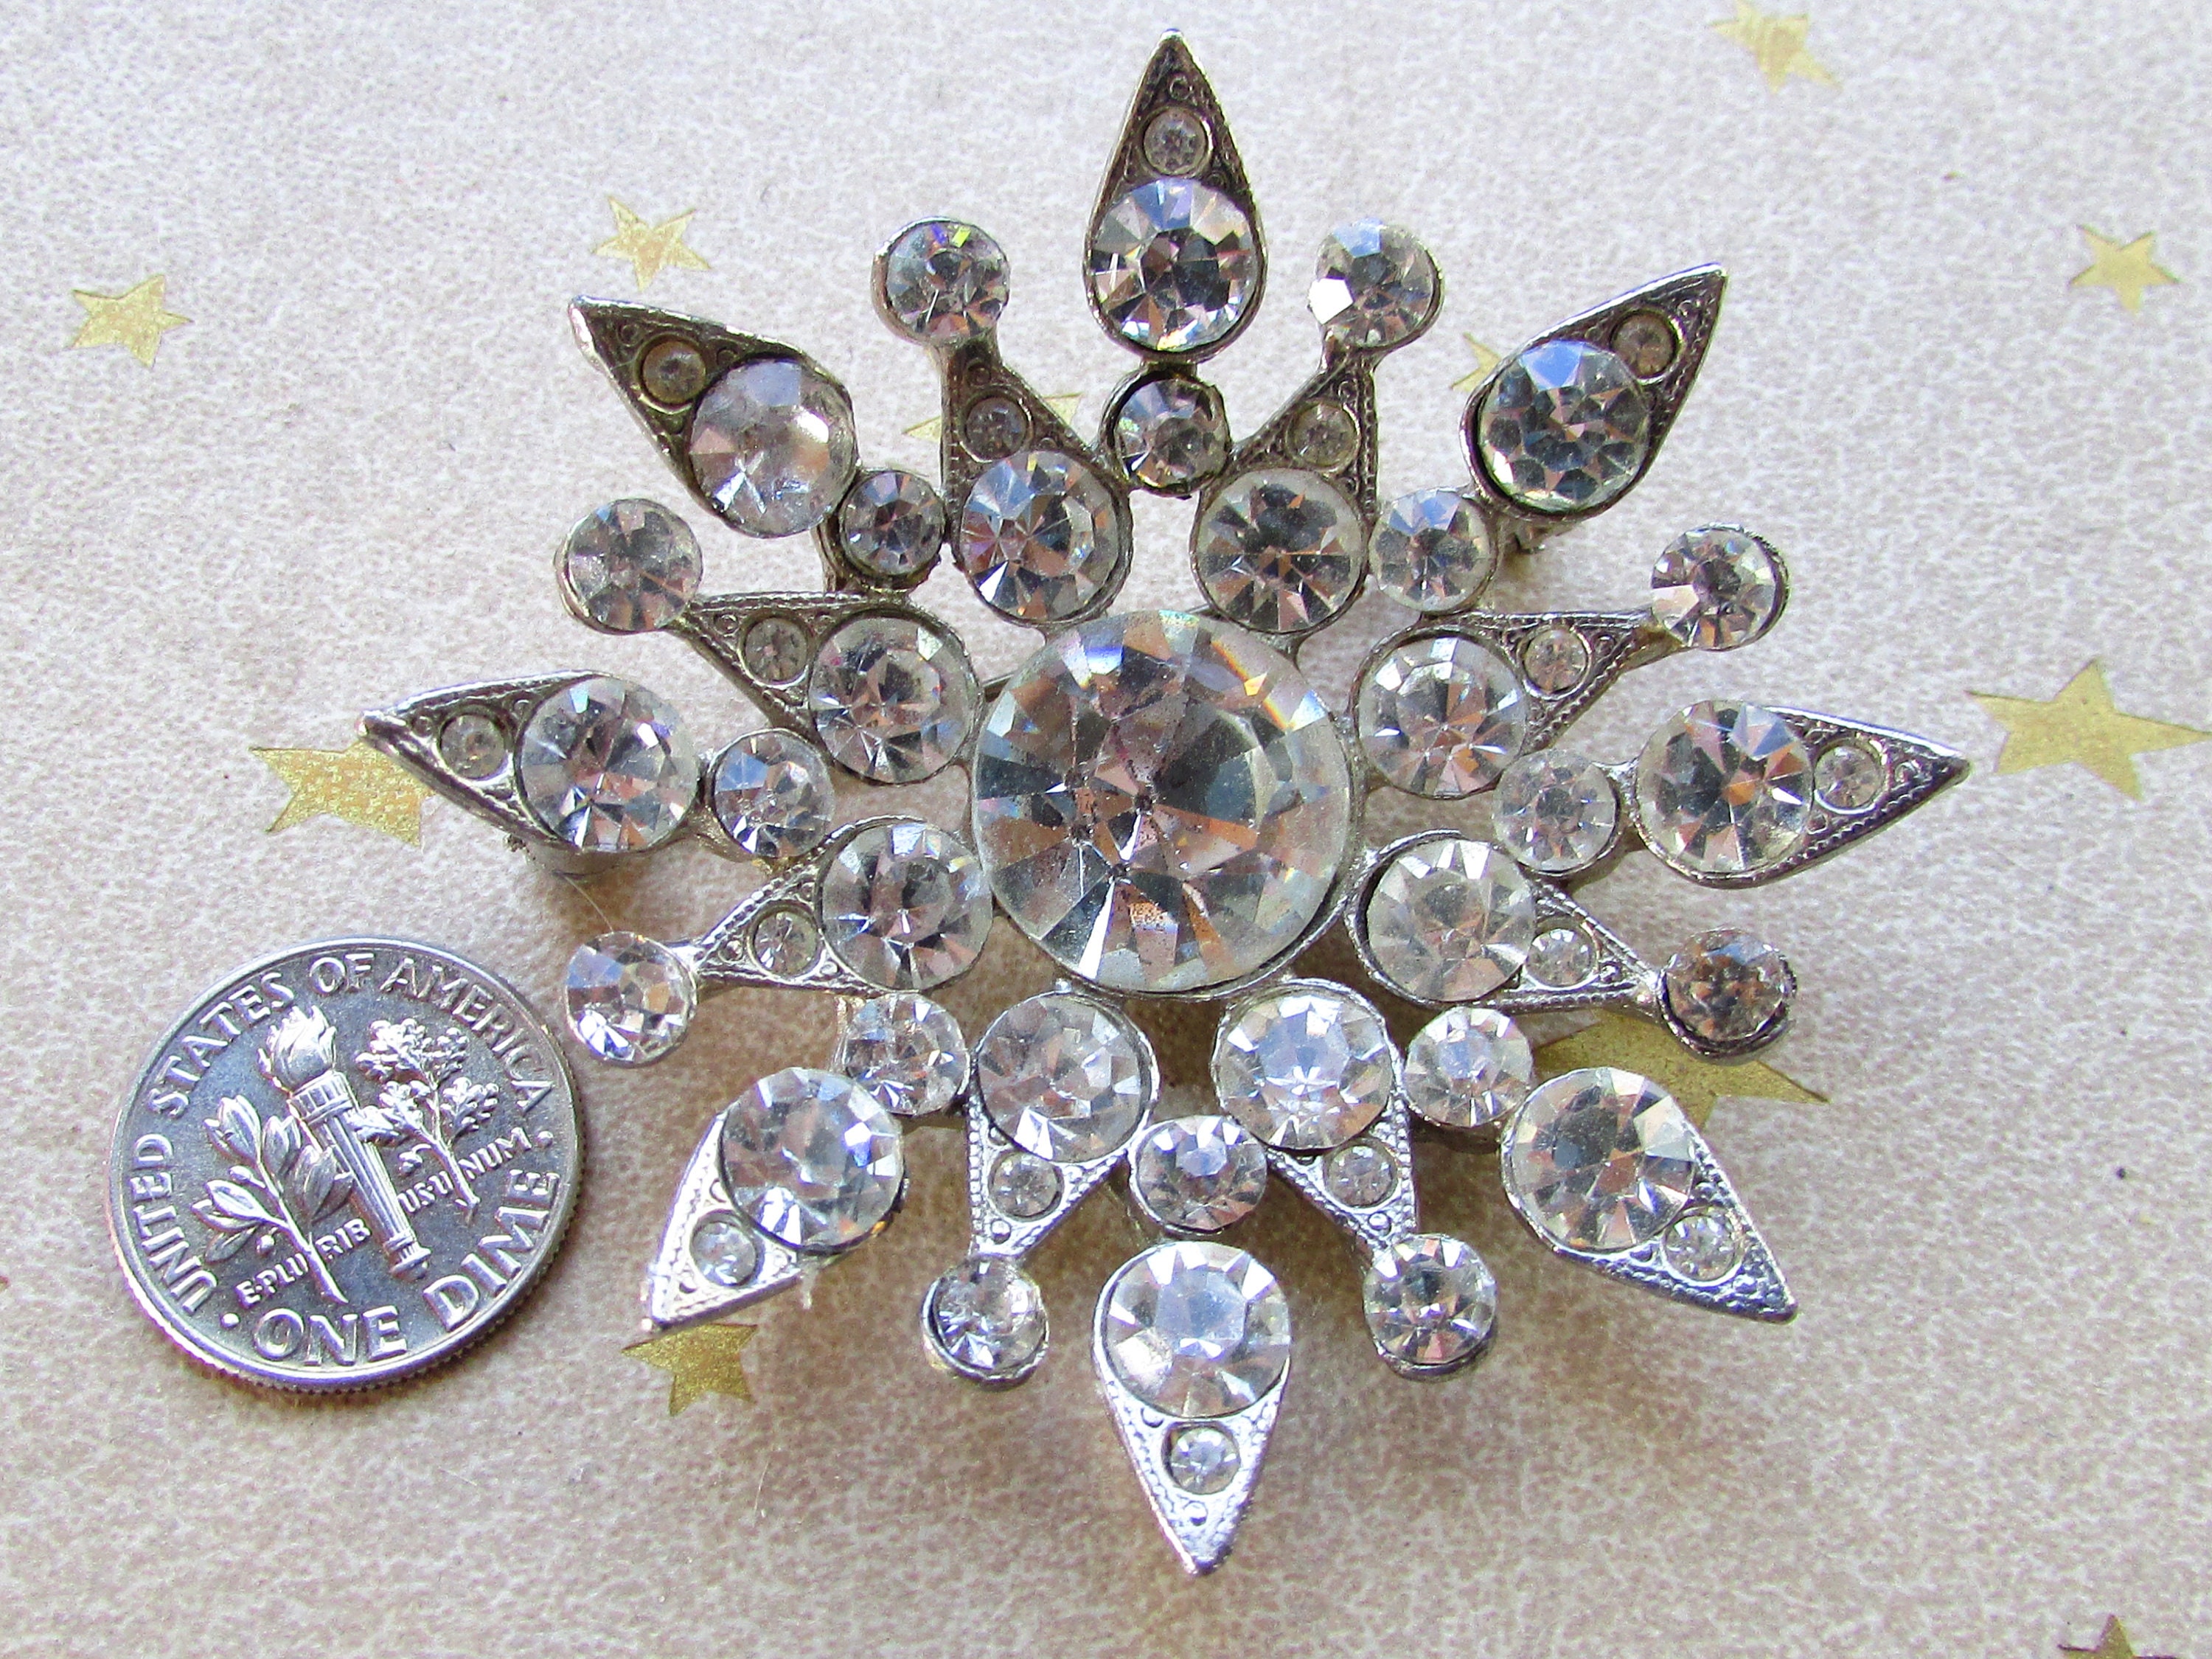 NEW REDUCED PRICE Snowflake Style 50s Vintage Brooch Unique Big